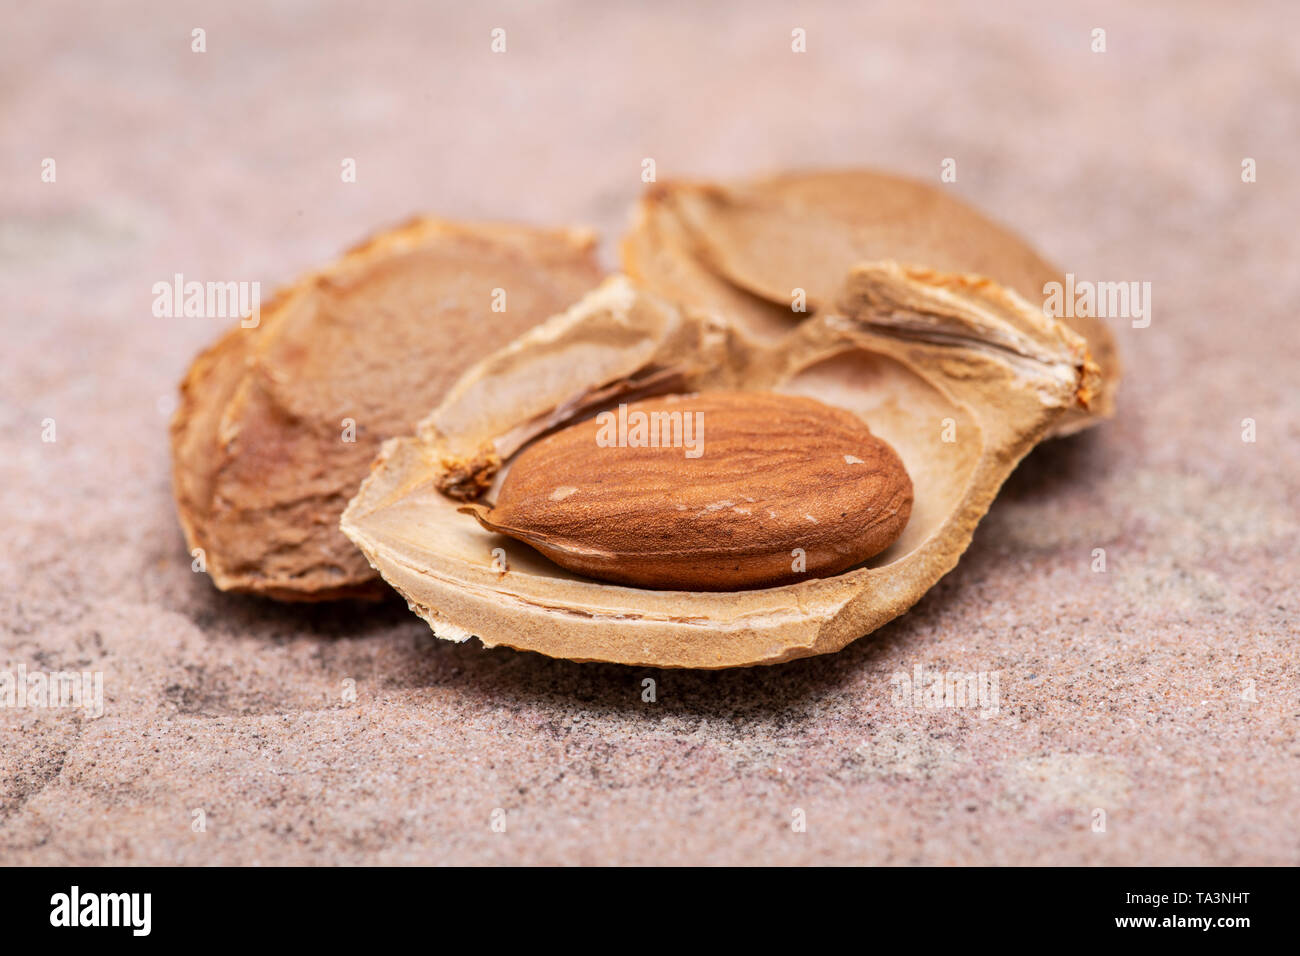 Dried Apricot Kernels (the seed of an apricot, often called a 'stone') on natural stone background. Amygdalin. Vitamin B17. Stock Photo